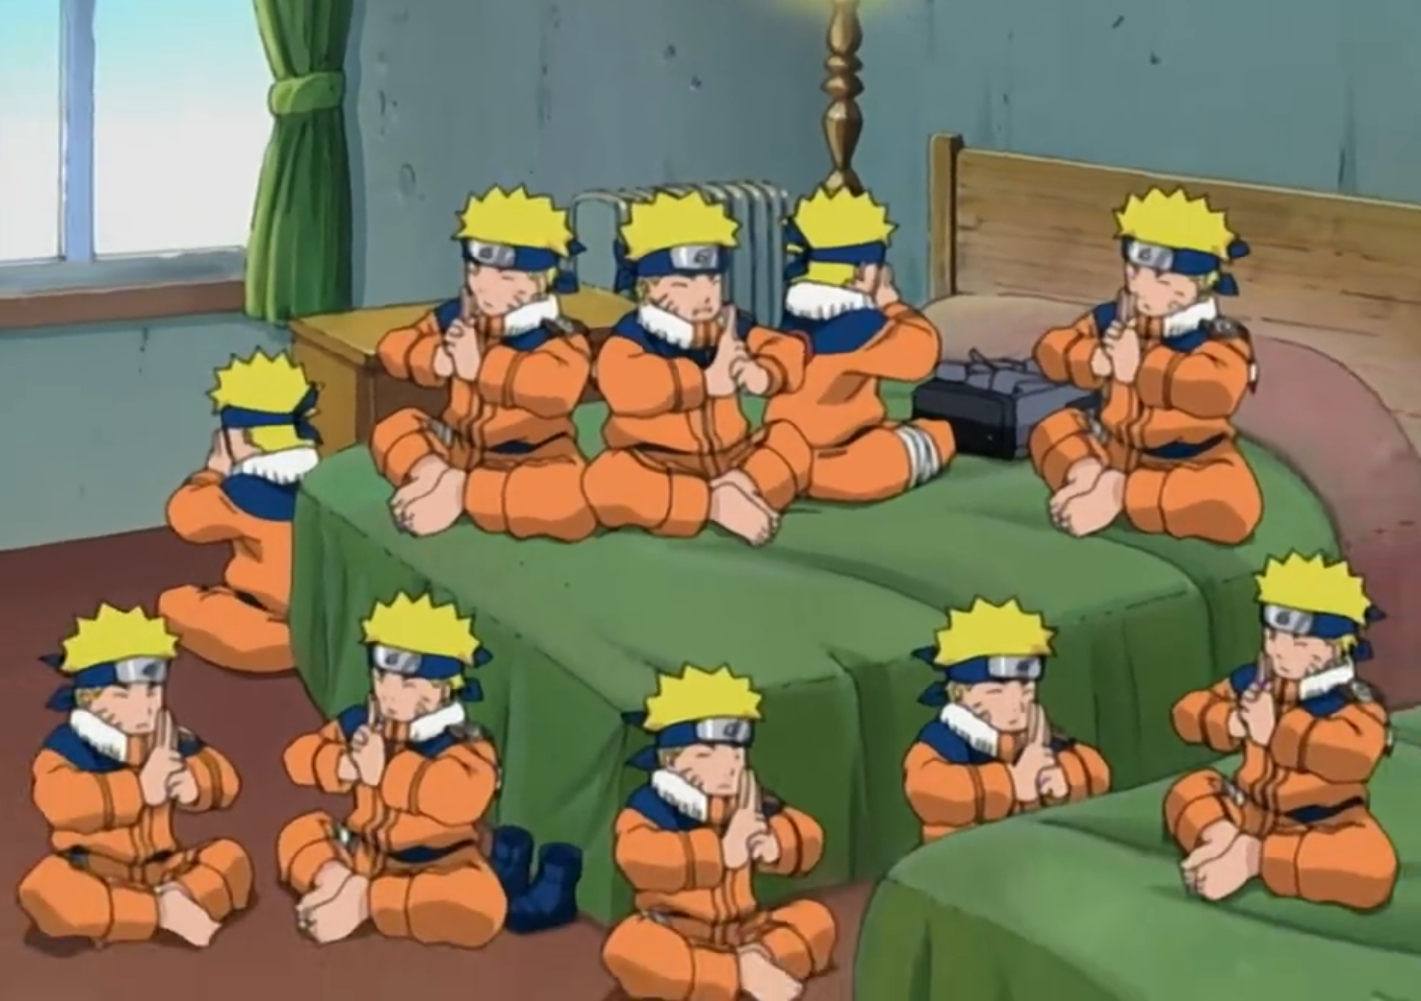 Can we talk about the fact that Naruto figured out shadow clone training 3 years before he used it to create the rasenshuriken